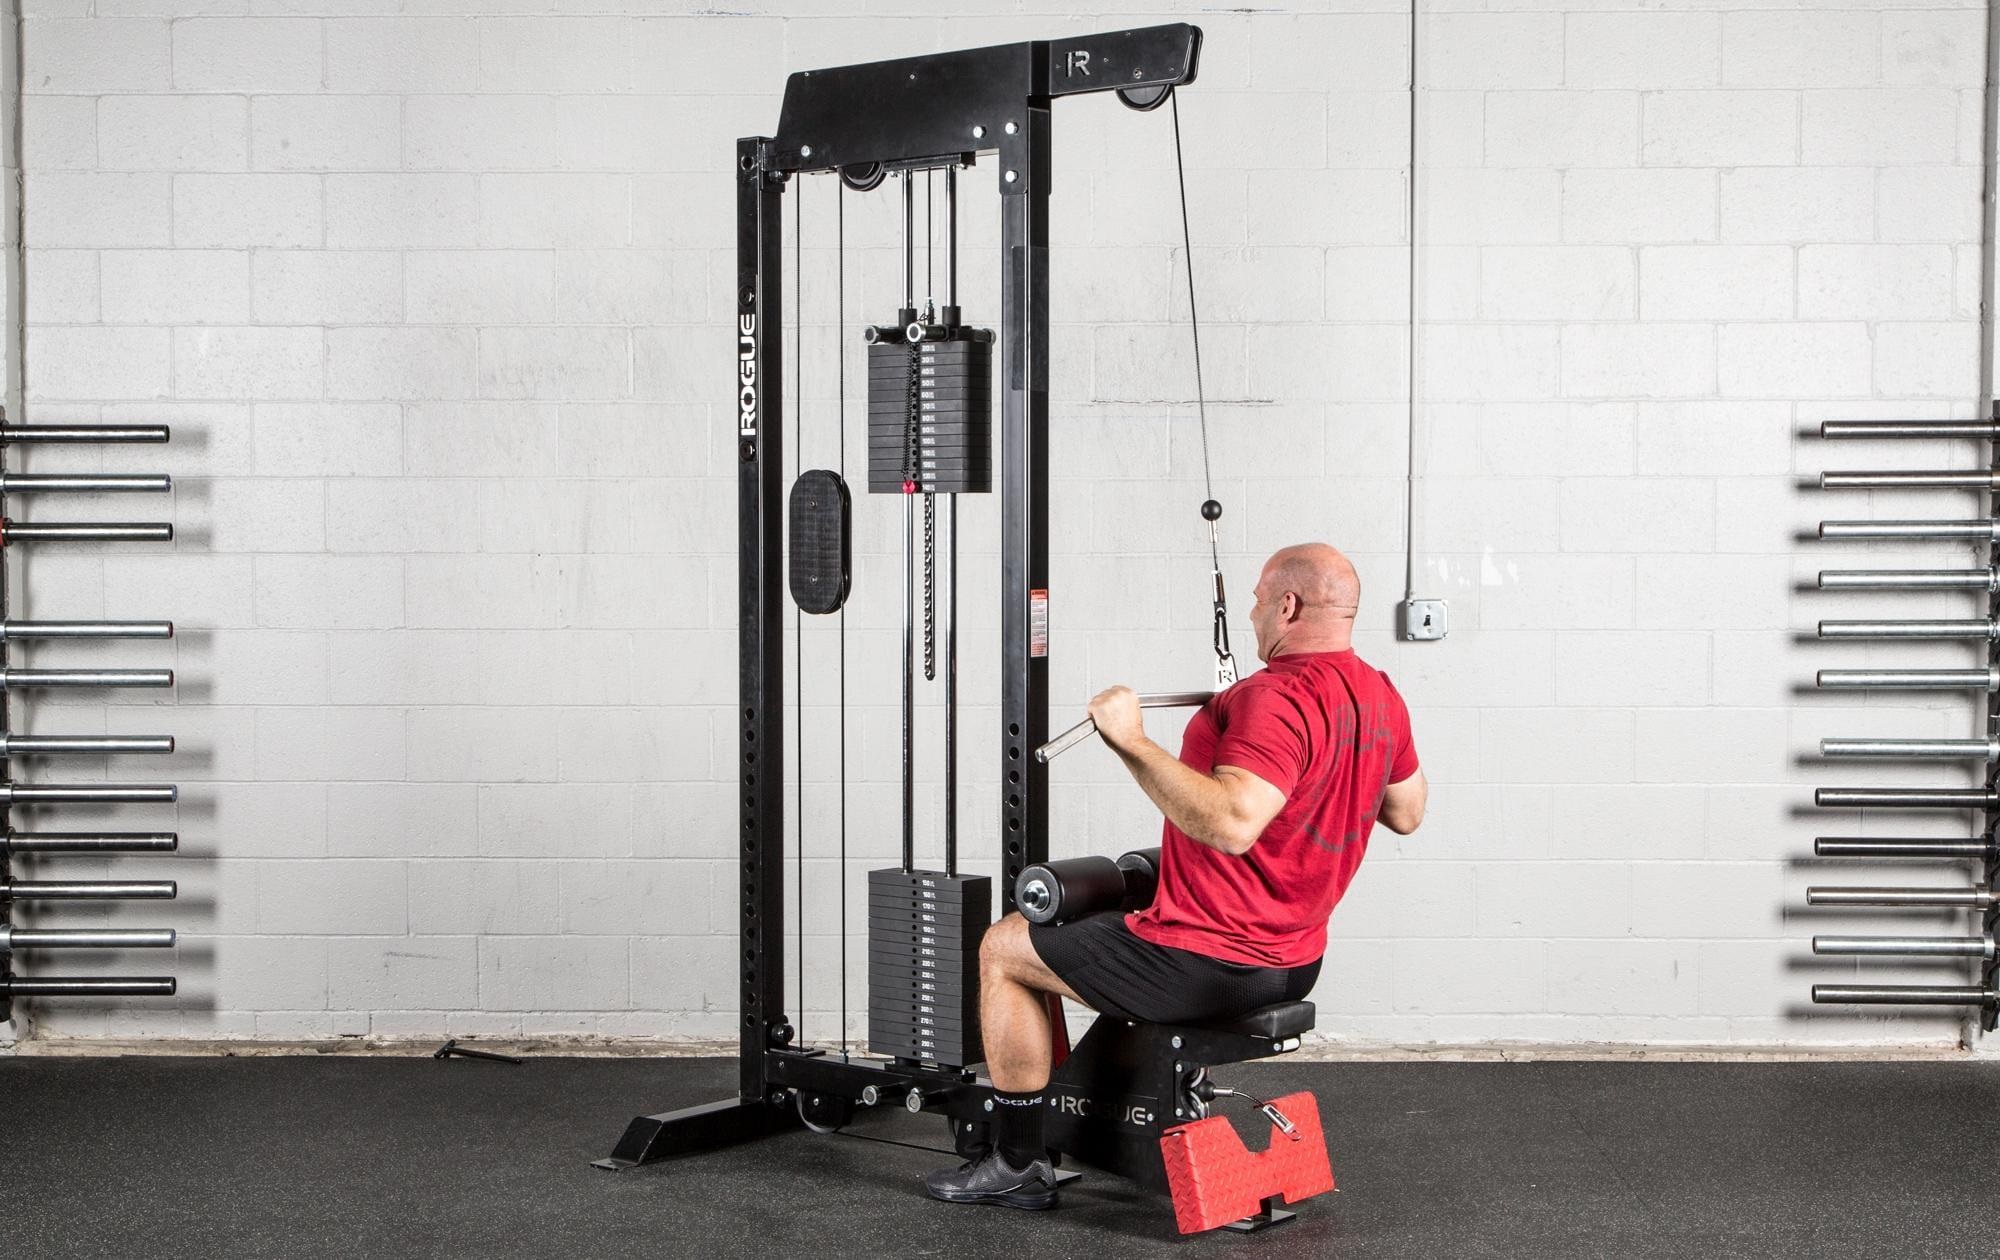 Top 3 Lat pull-down machines in affordable prices